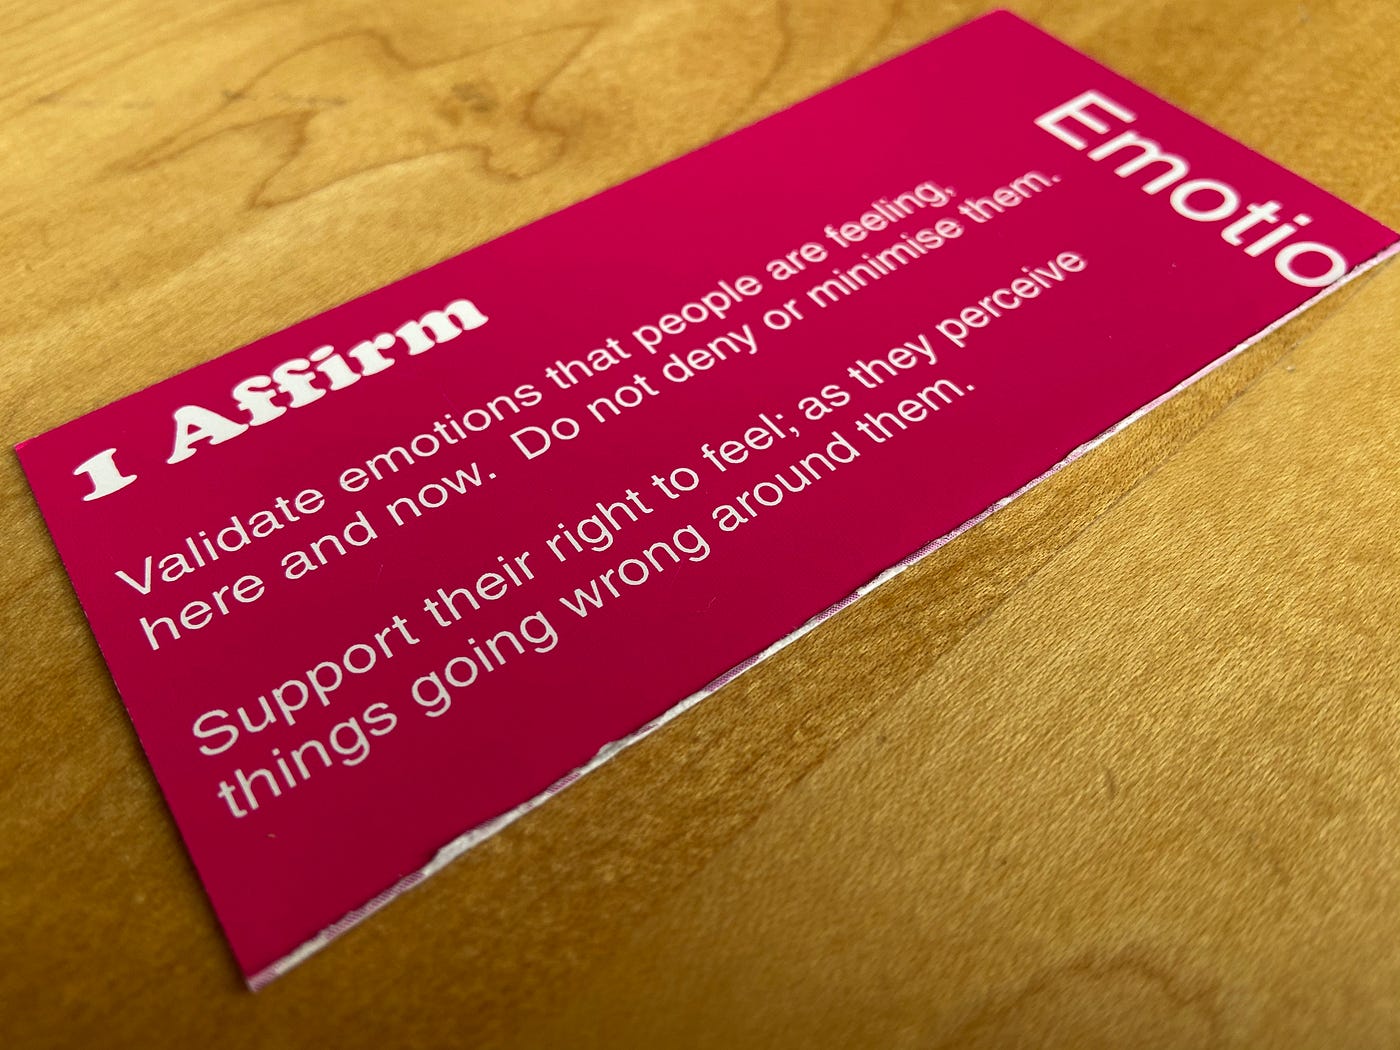 Affirm — from cut up postcard — validate emotions